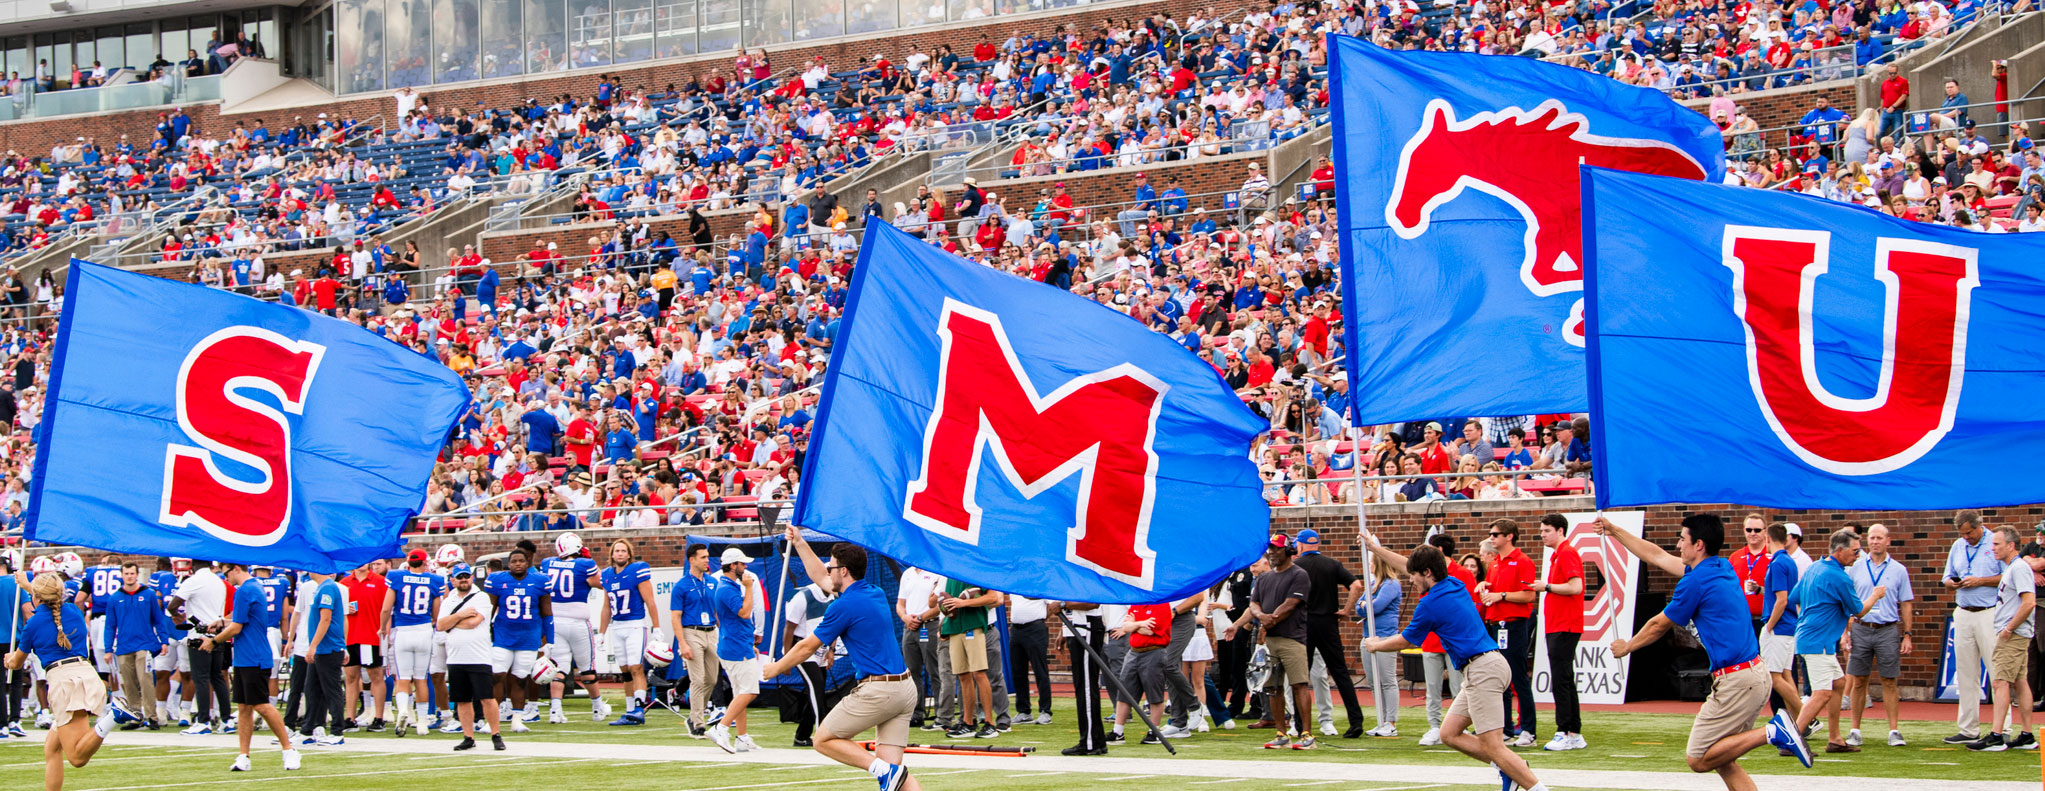 SMU banners at the game